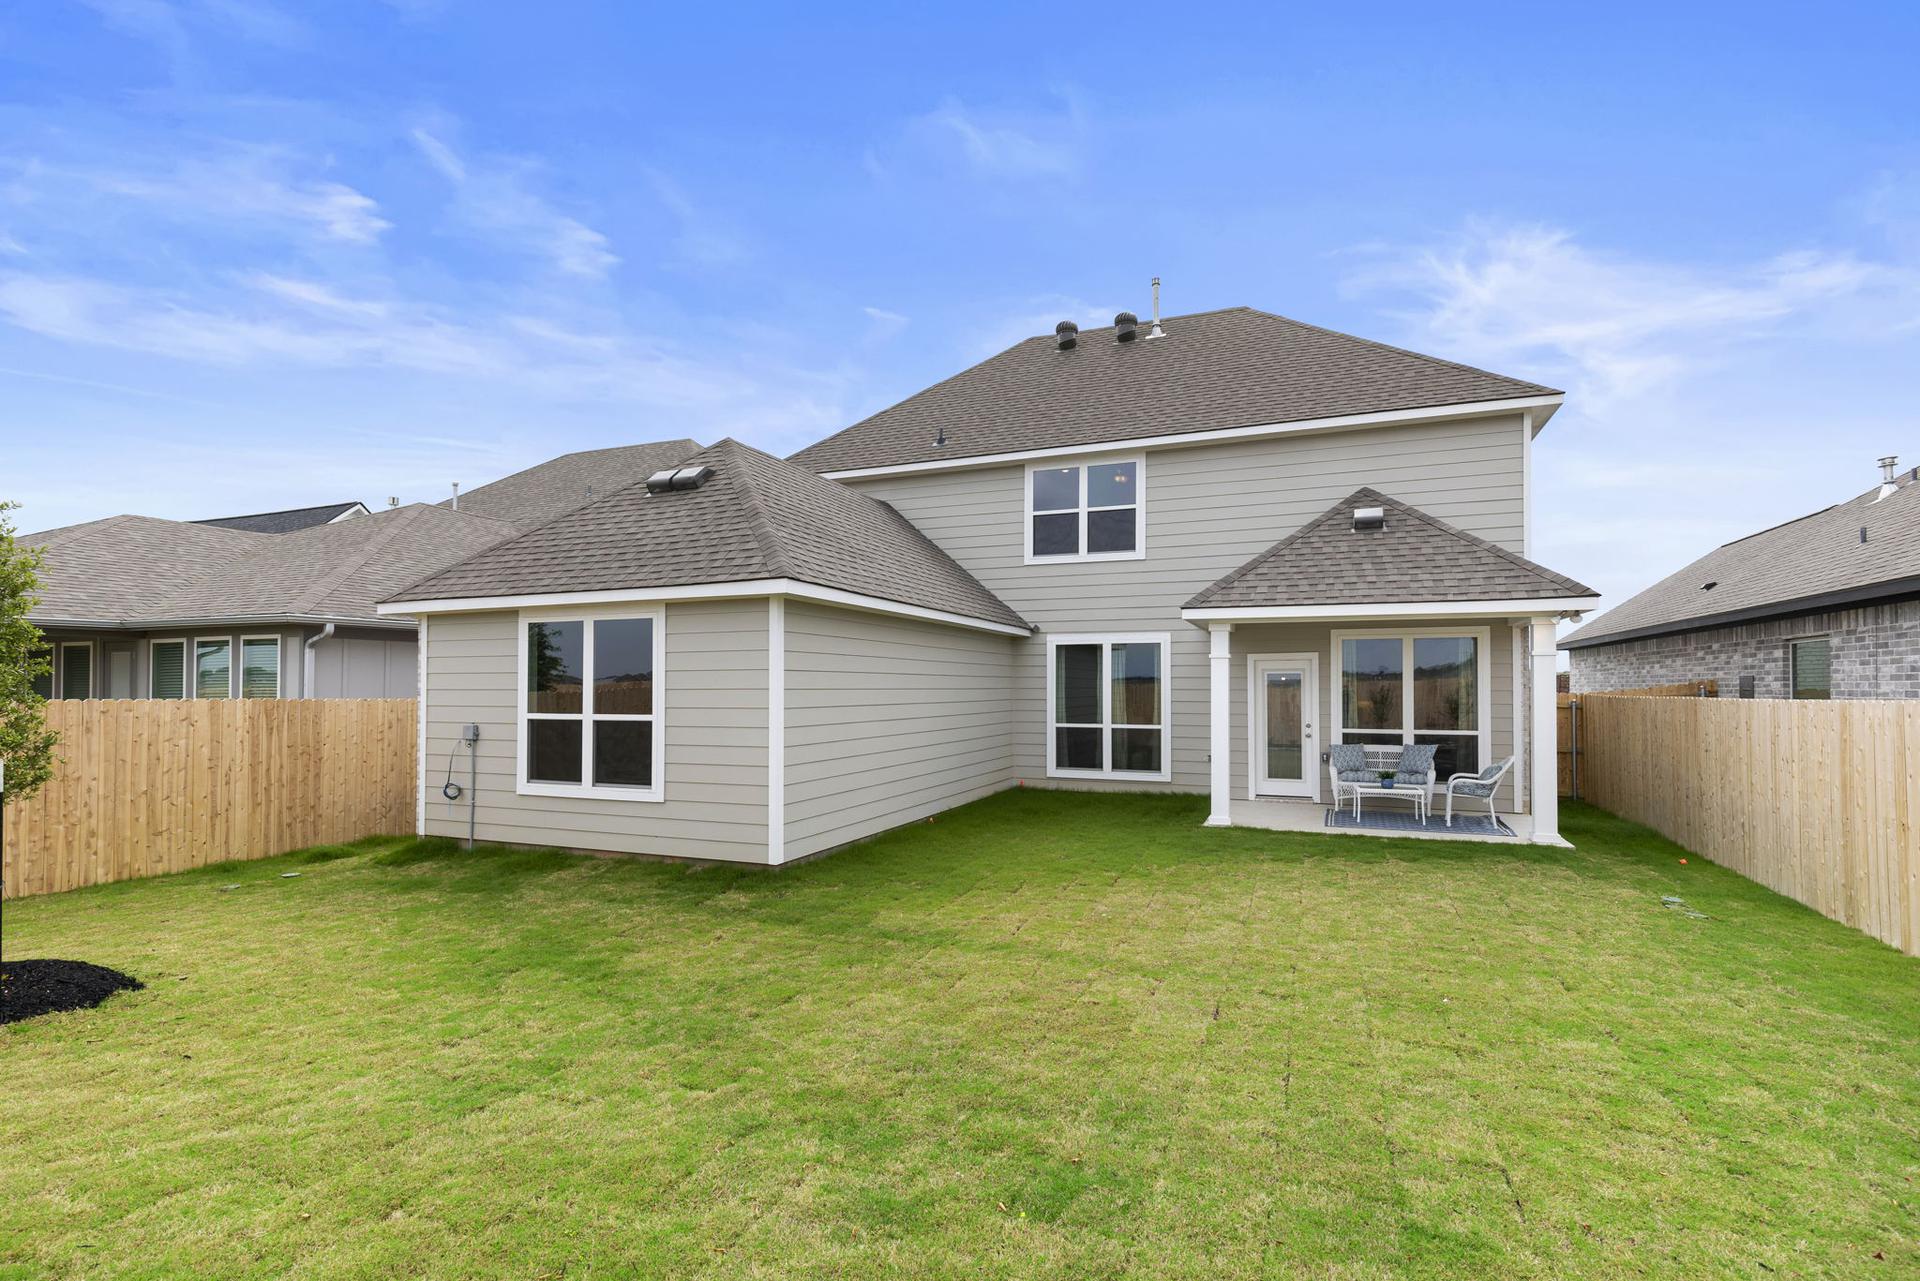 2588 New Home in Montgomery, TX